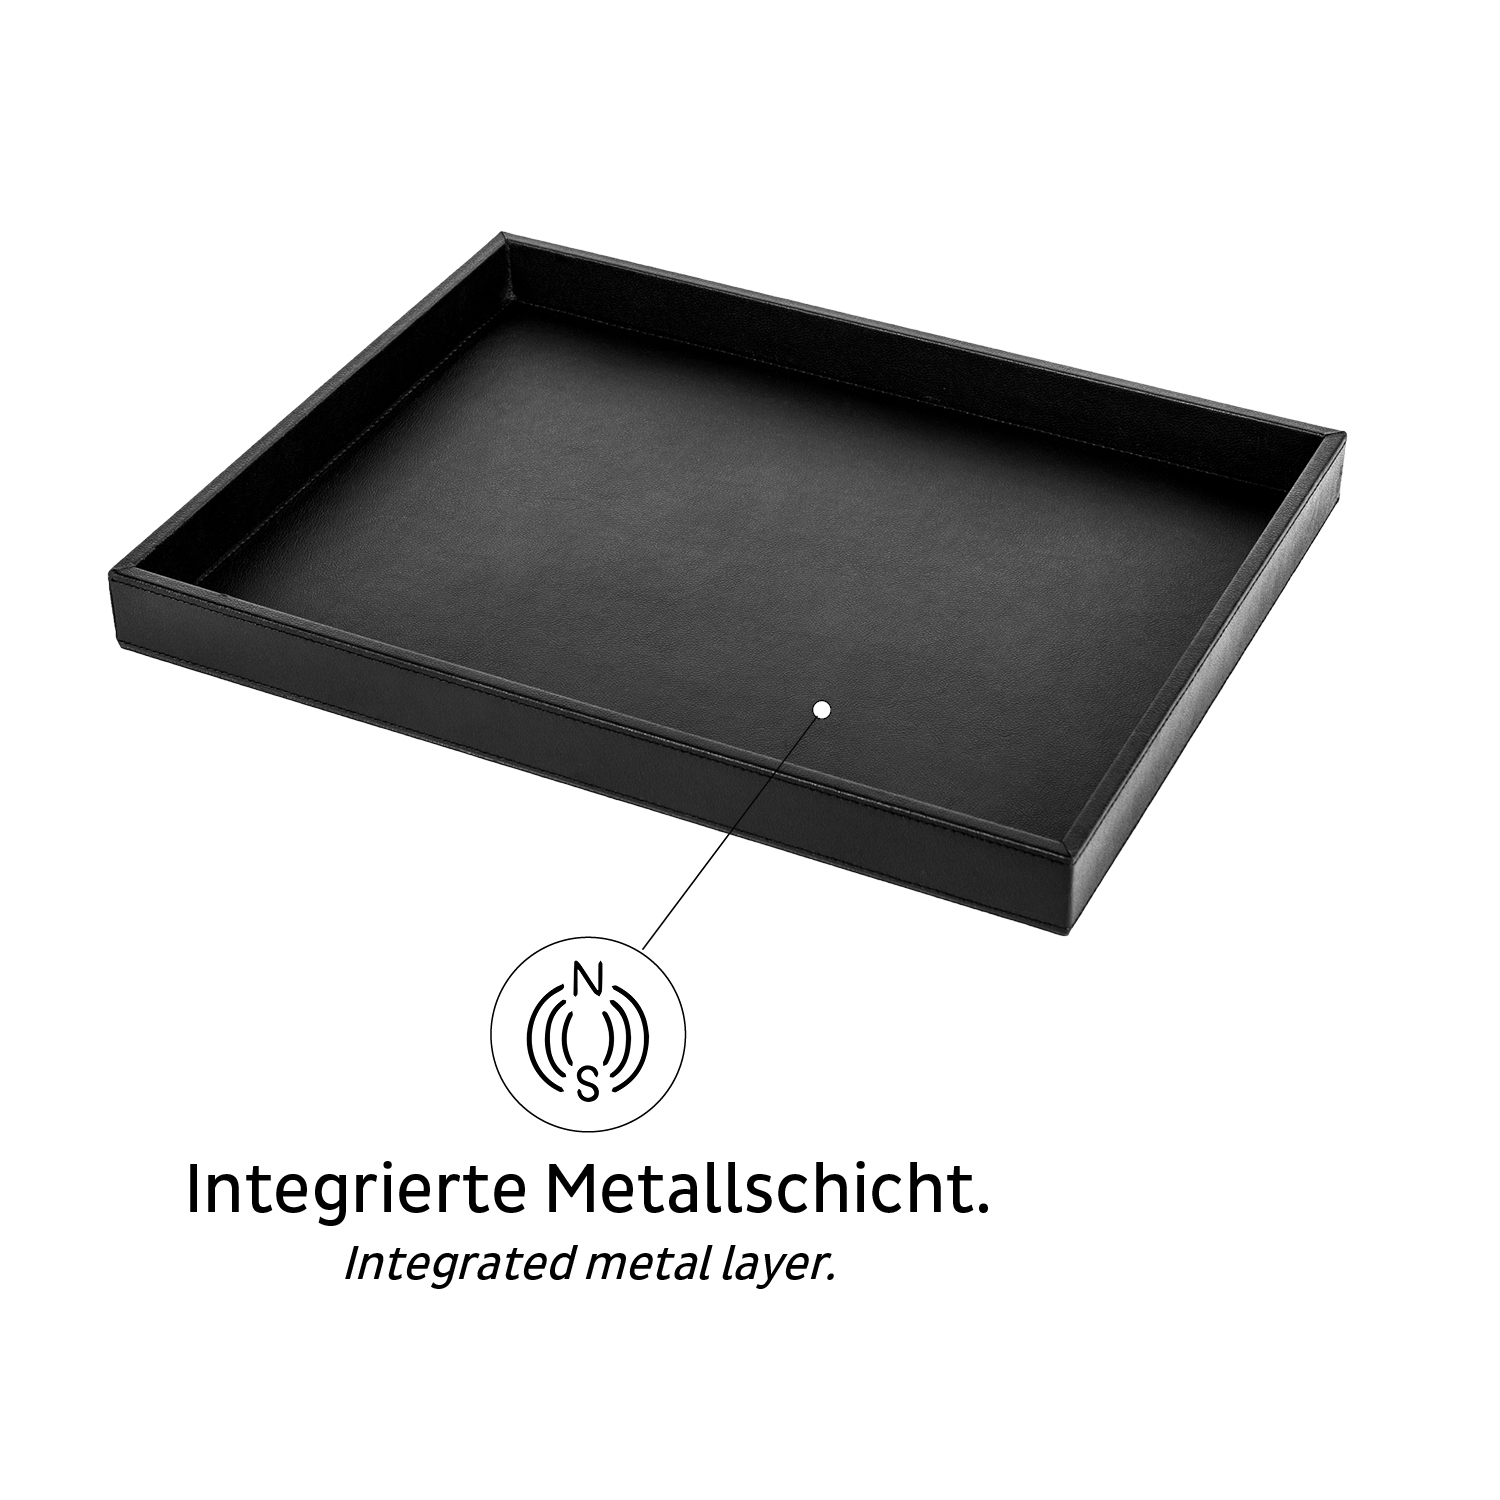 Made Metall-Nano-Matte Magnetglas-System - silwy Germany in für | cleveres